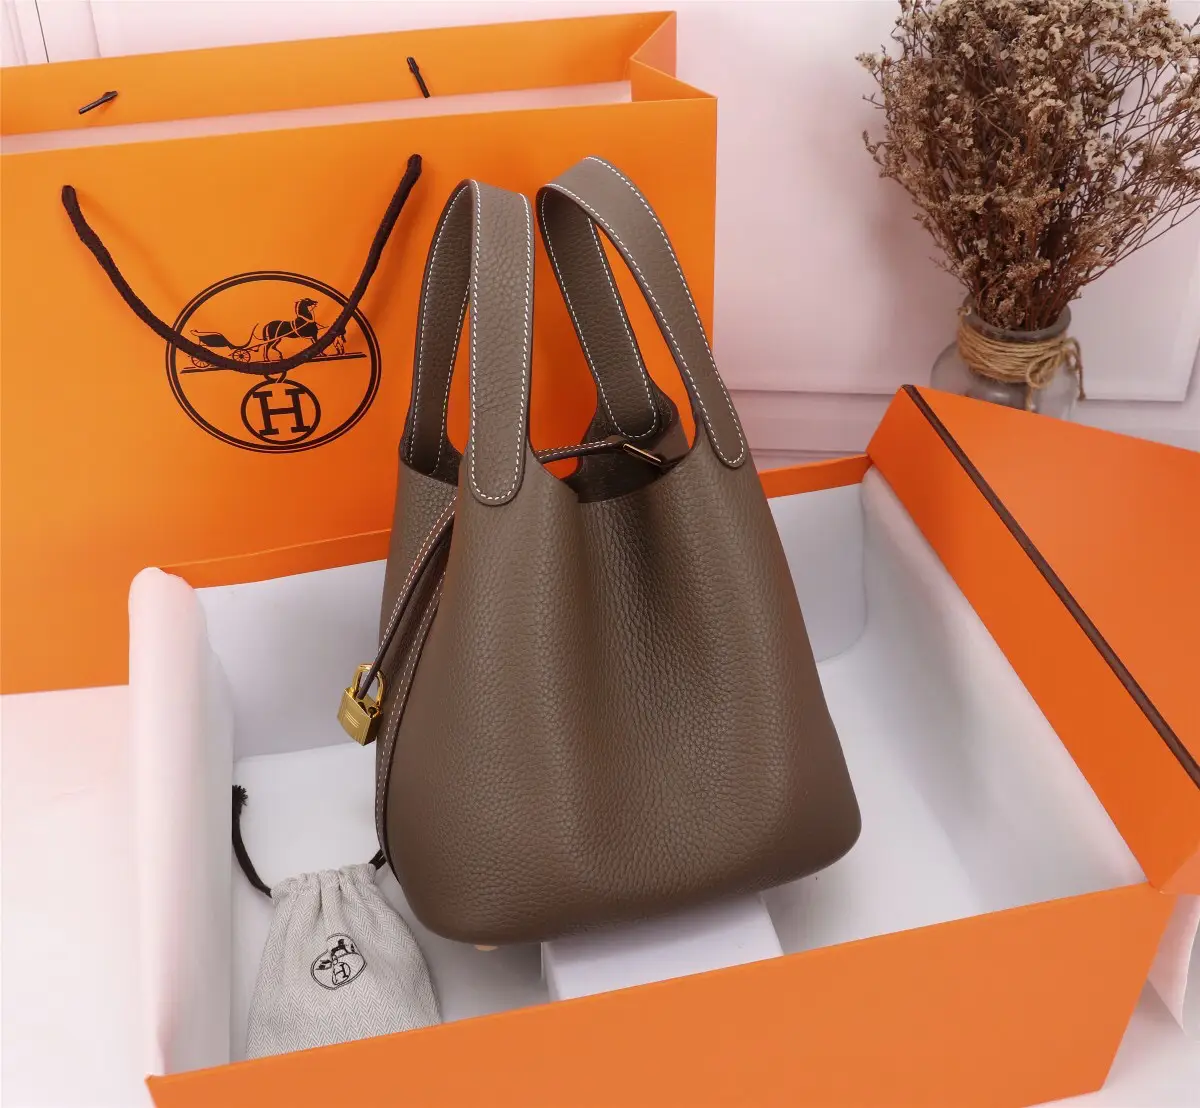 HERMES Picotin 18 BAG UNBOXING: First Hermes bag purchase and first  impressions! Luxury handbag love 